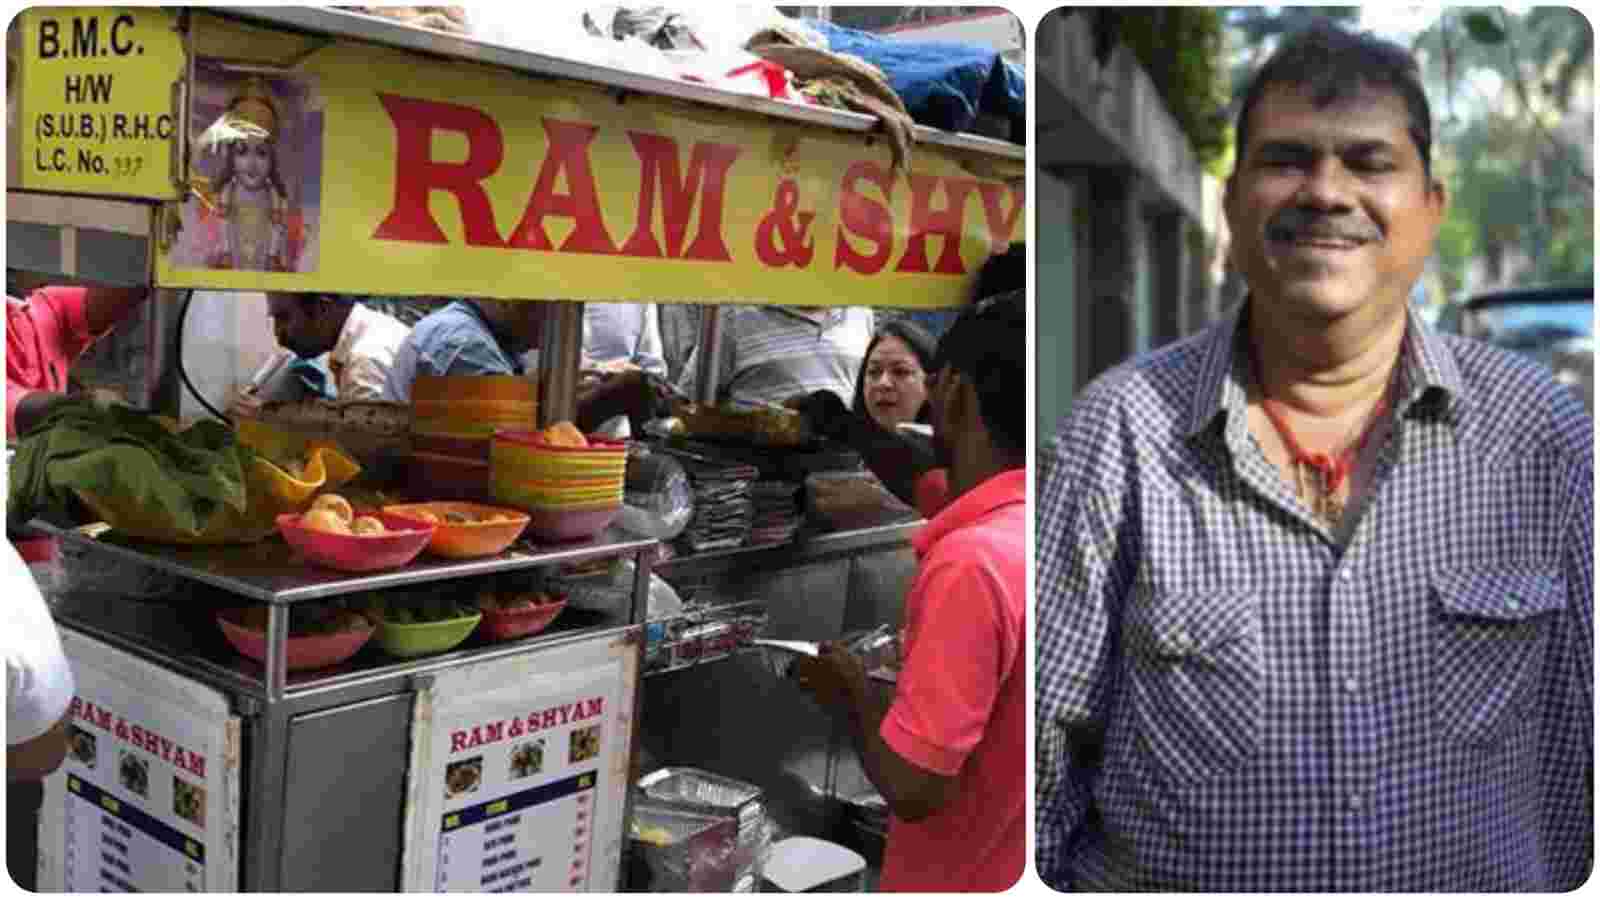 Mumbai Pani Puri vendor's journey: From Rs 5 daily income to owning two lavish flats